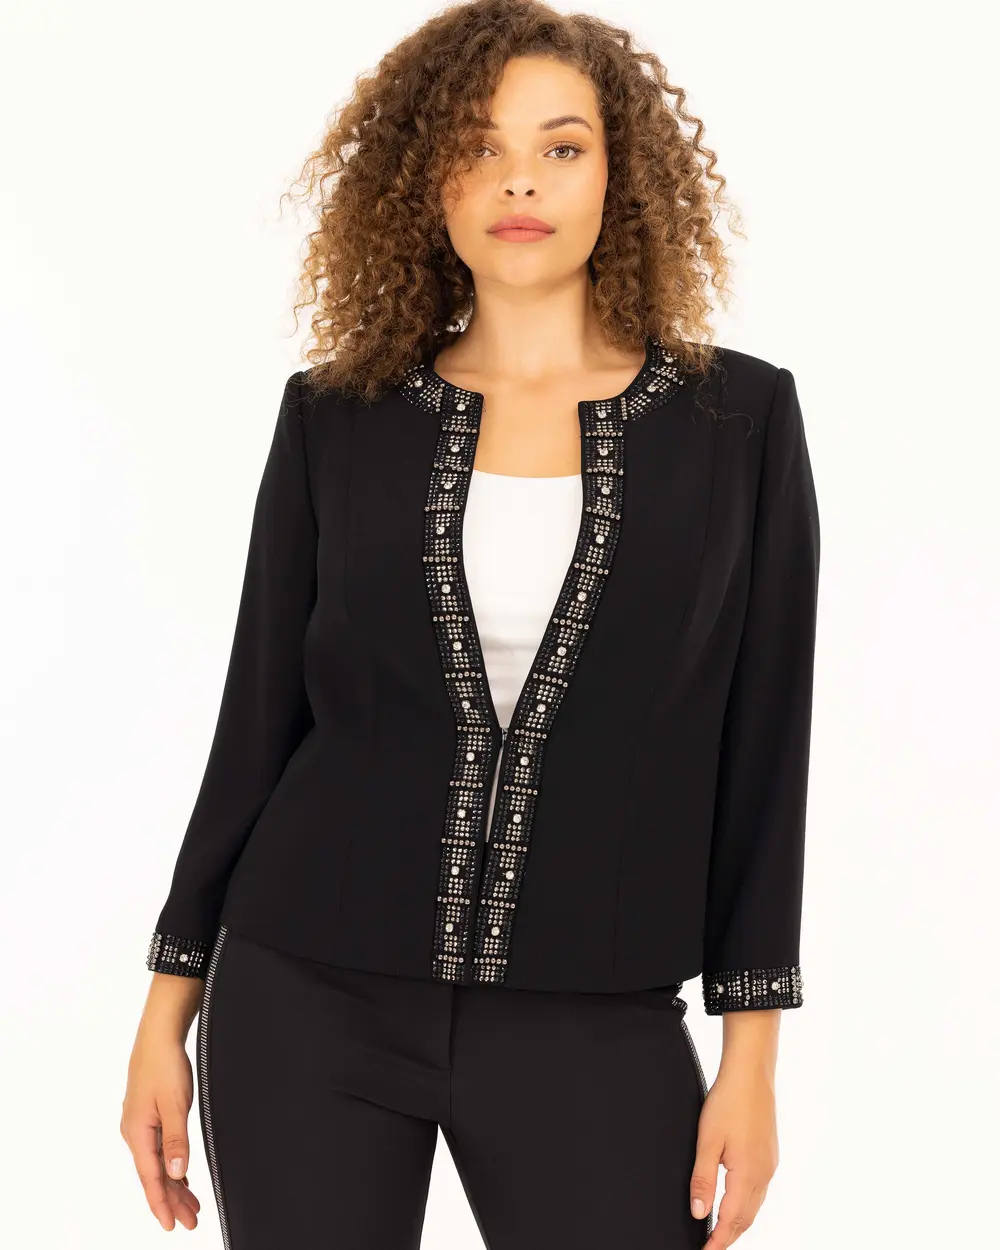 Plus Size Elegant Jacket with Pearl Detailing and Round Neckline